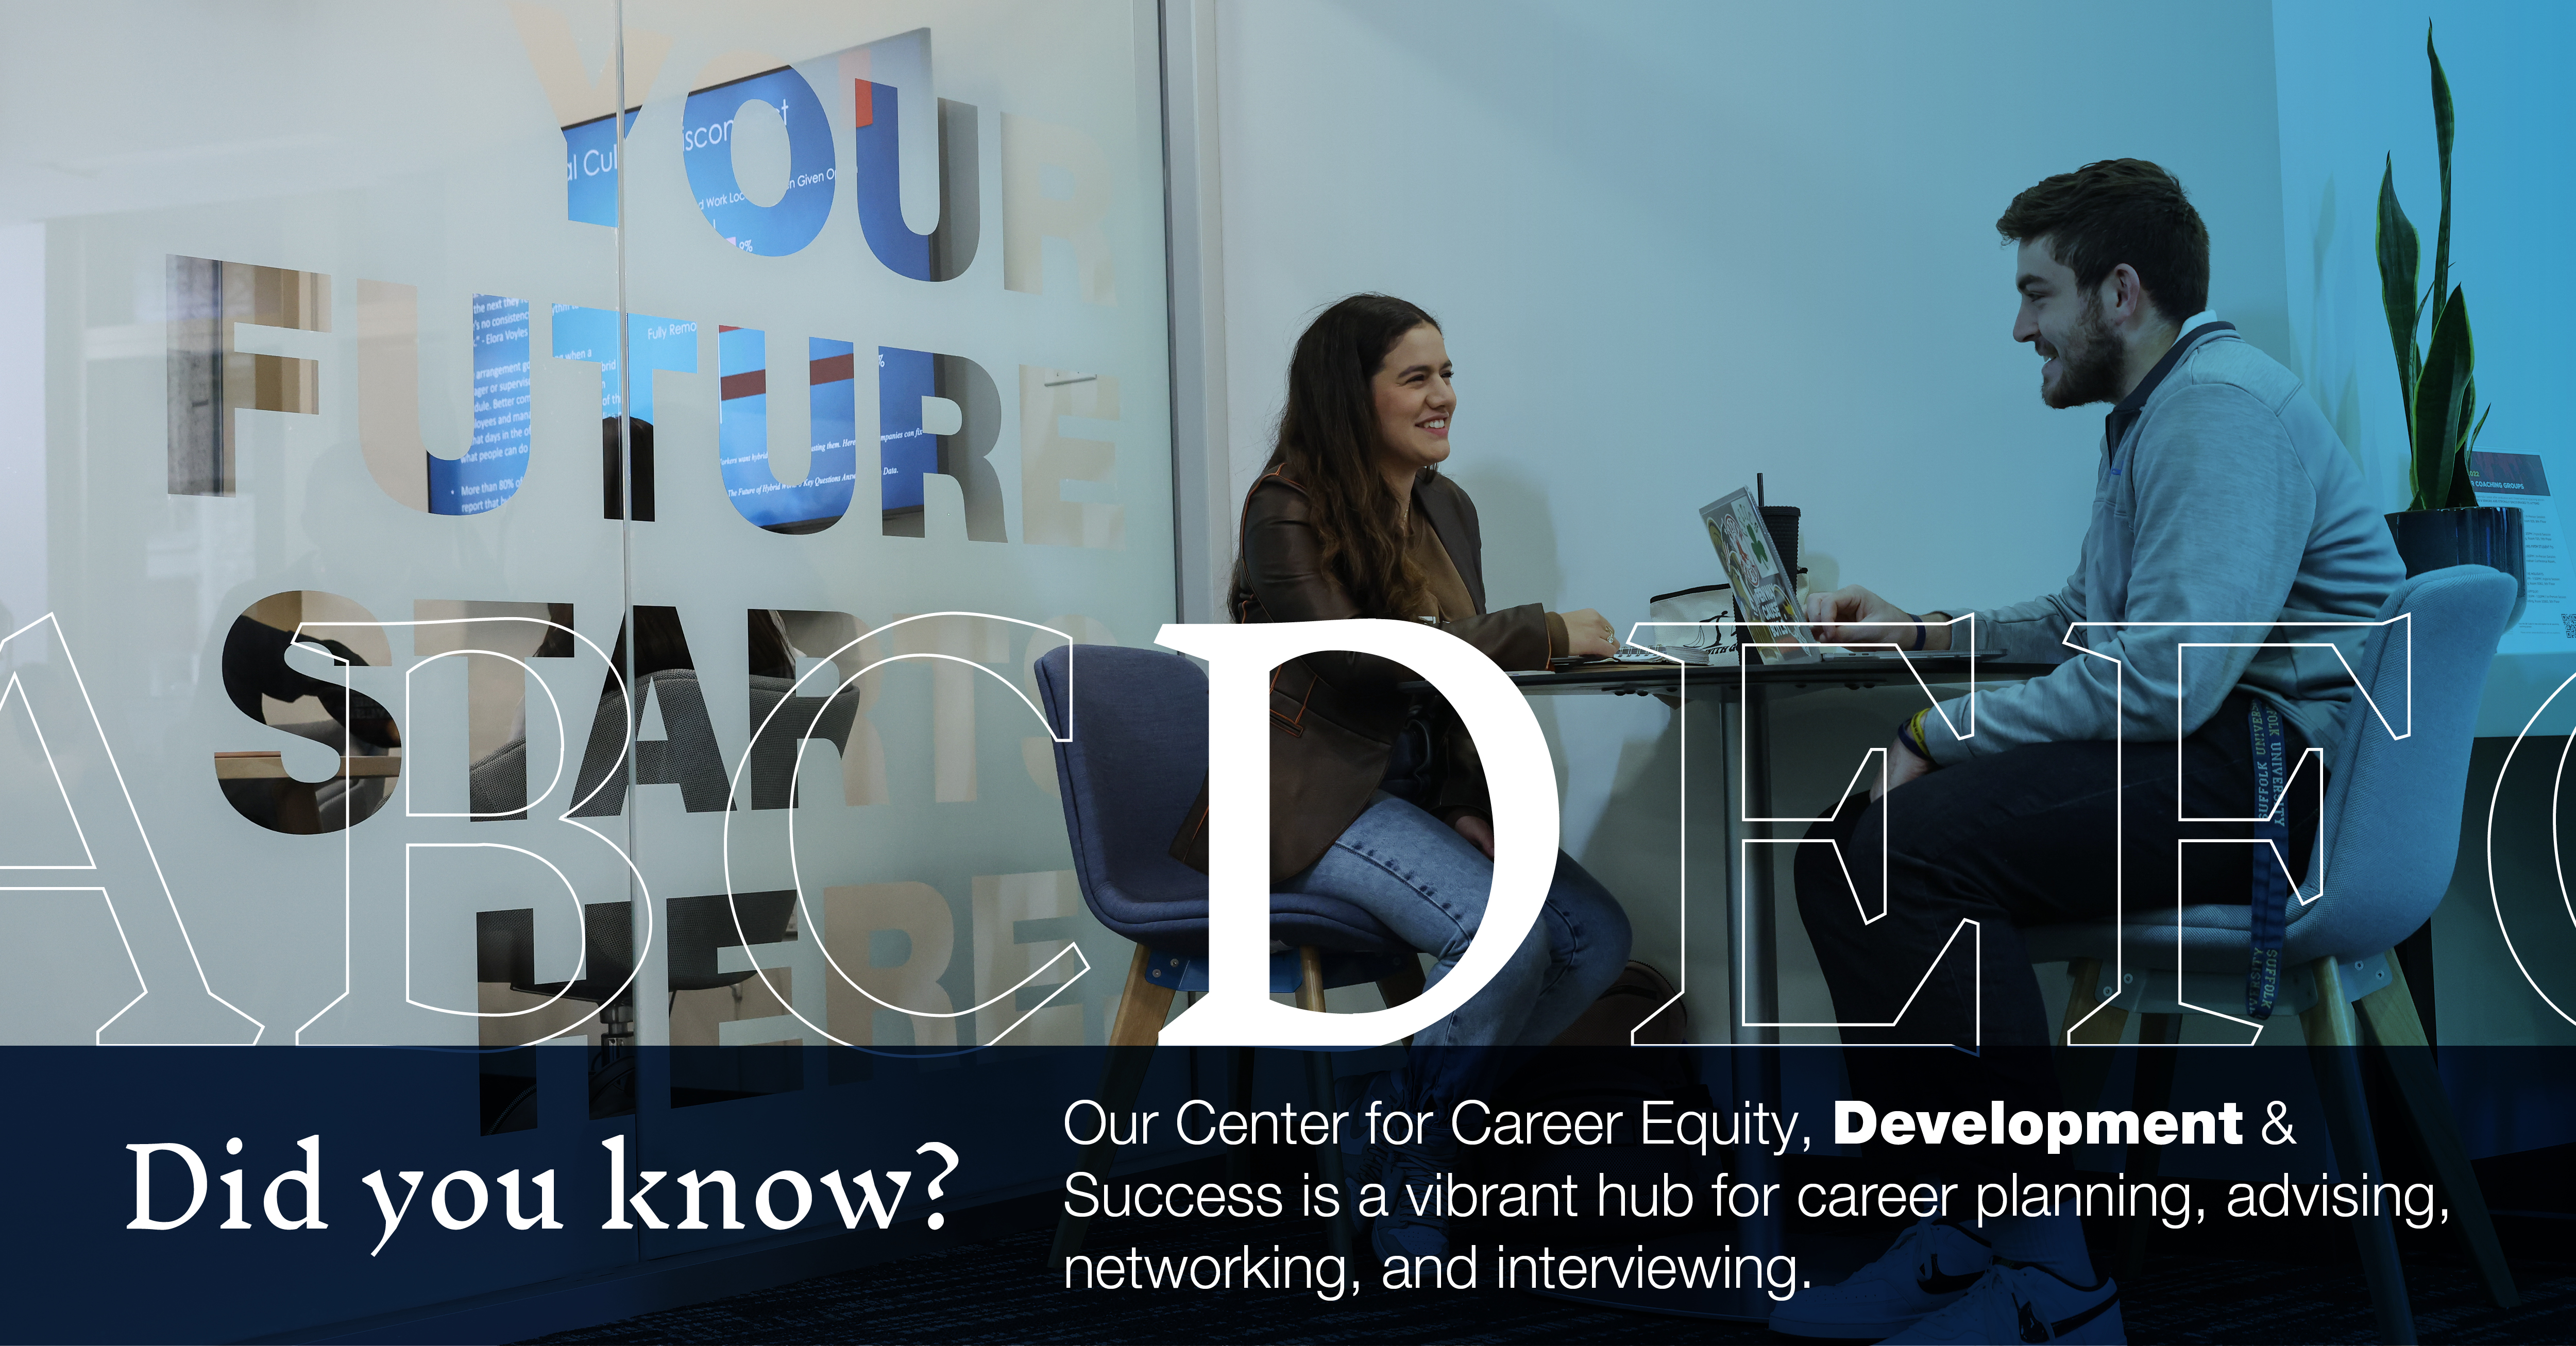 Image of students talking in our Career Center: "Did you know our Center for Career Equity, Development & Success is a vibrant hub for career planning, advising, networking, and interviewing?"